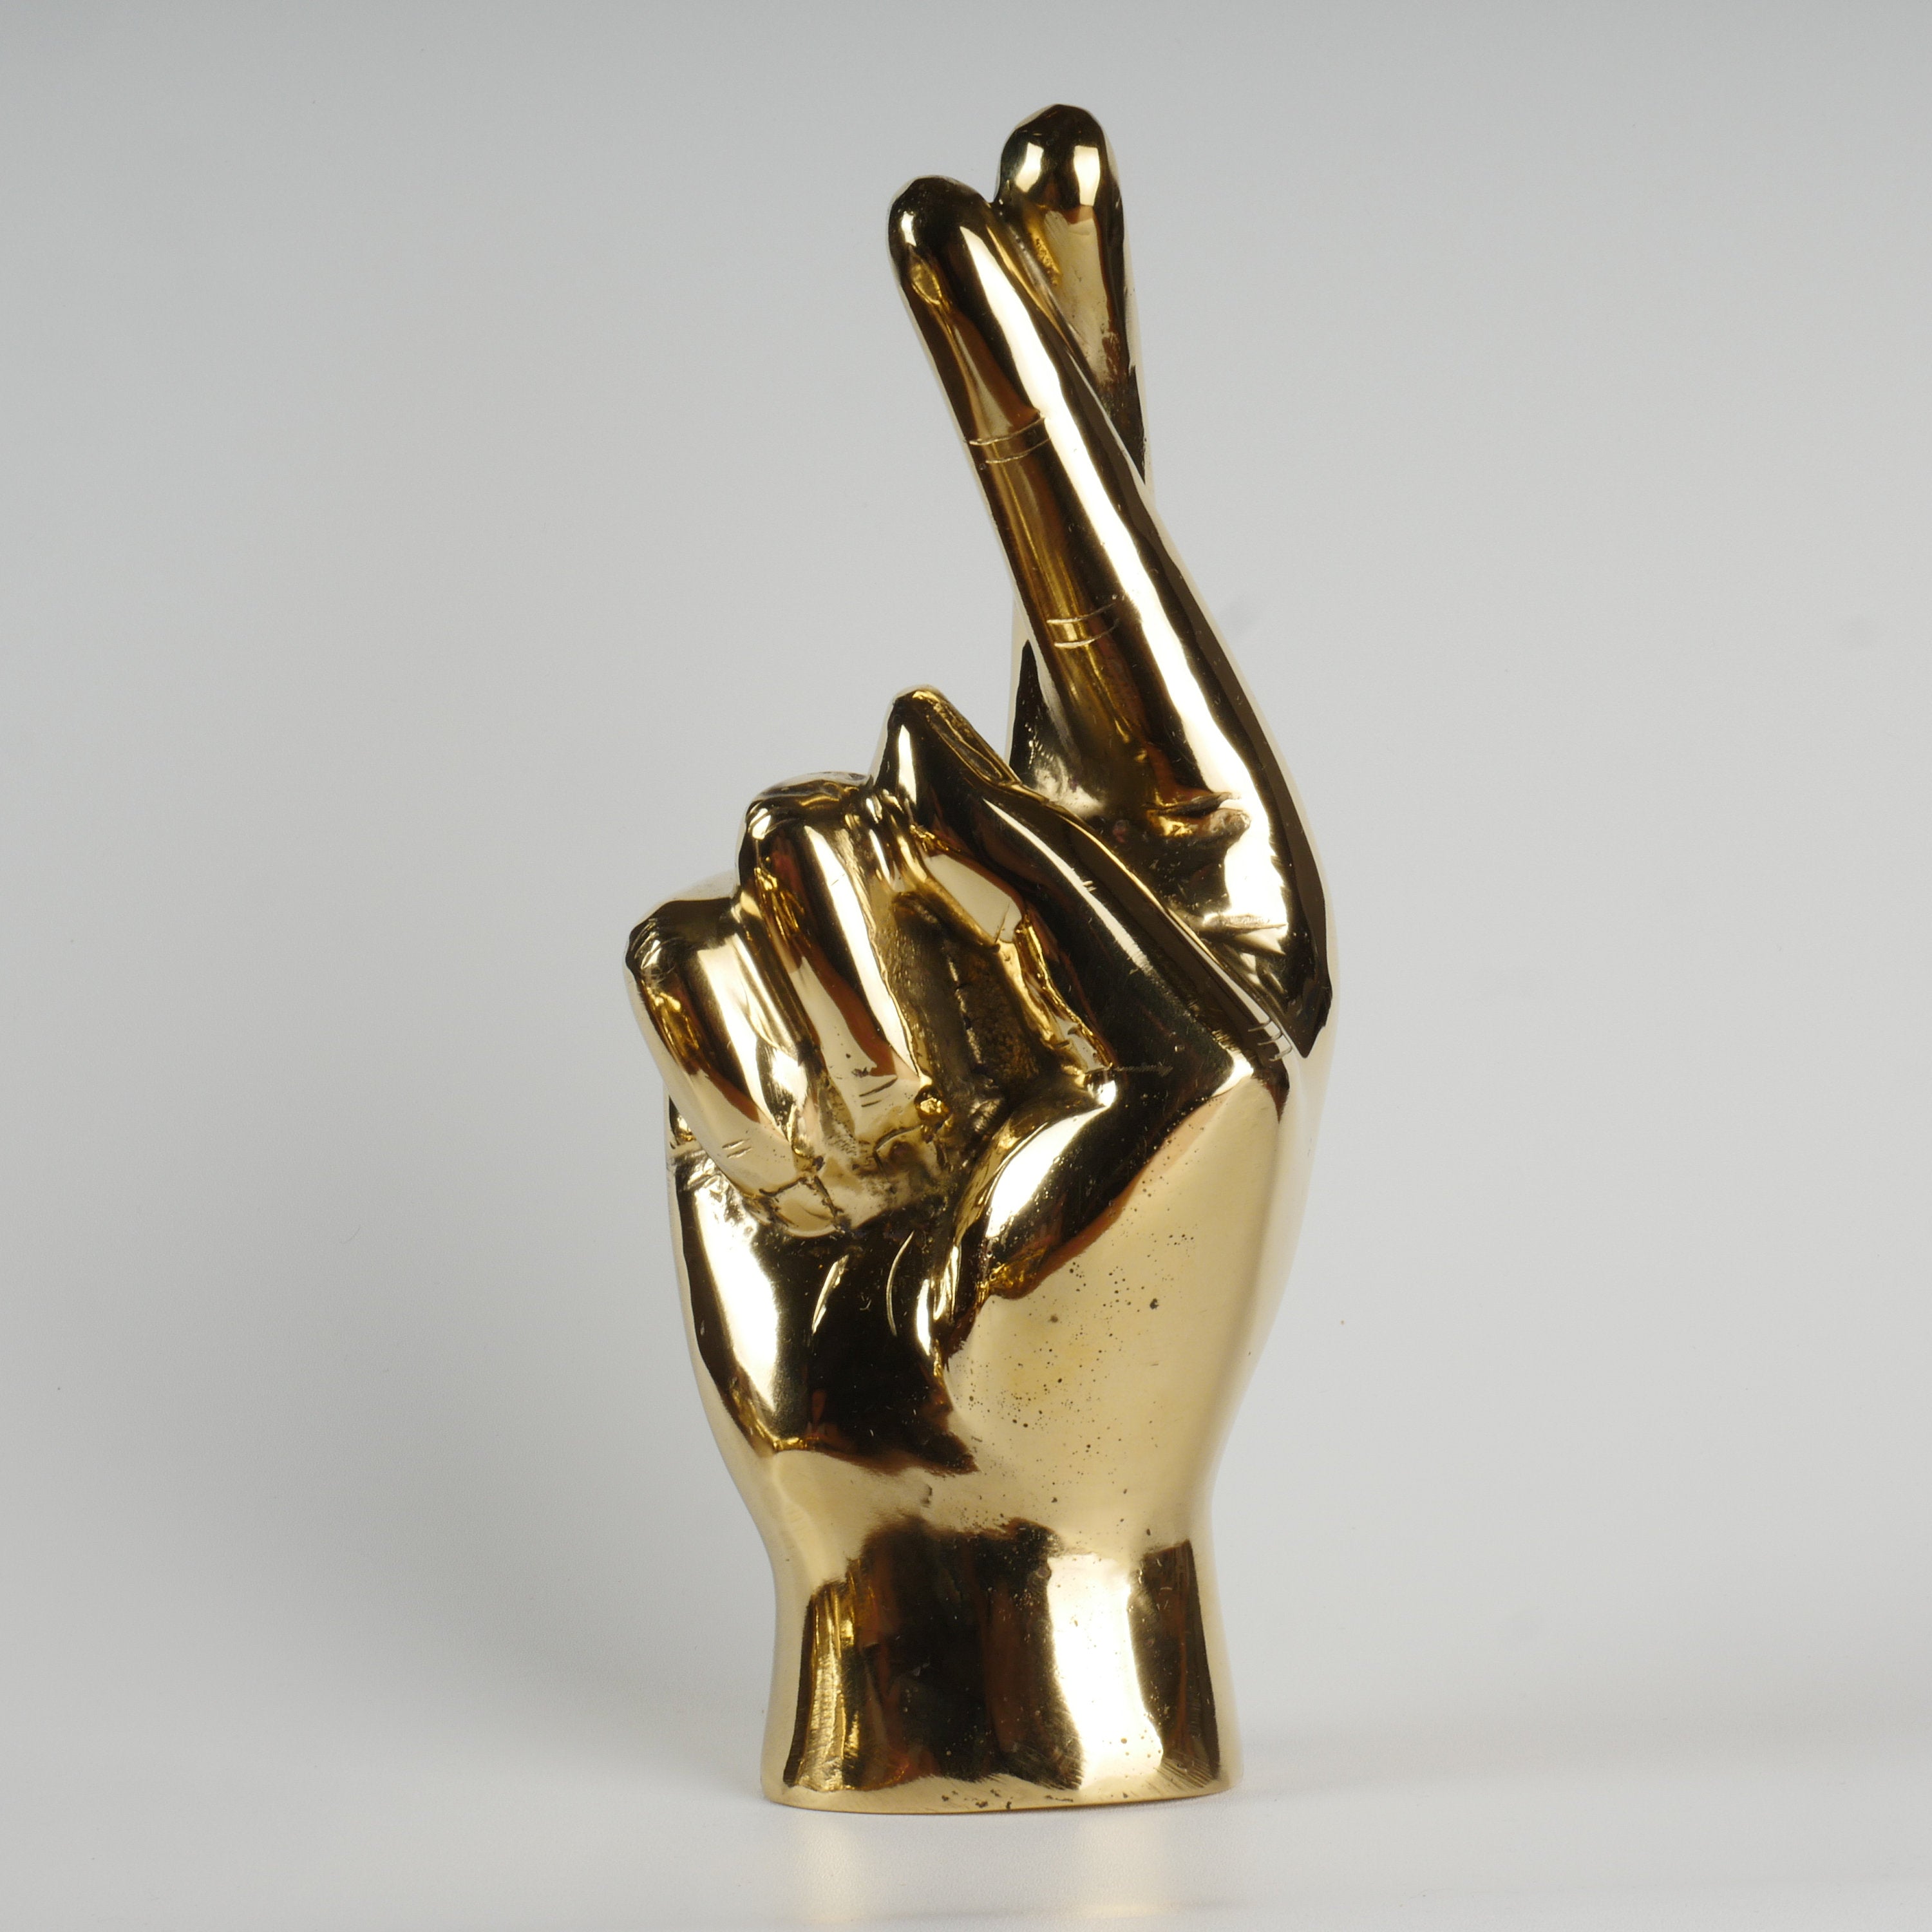 The Crossed Fingers - Promise Hand - Brass Crossed Fingers sign Sculpture - Brass Hand Sign - Brass Hand Signal - Brass Crossed Fingers